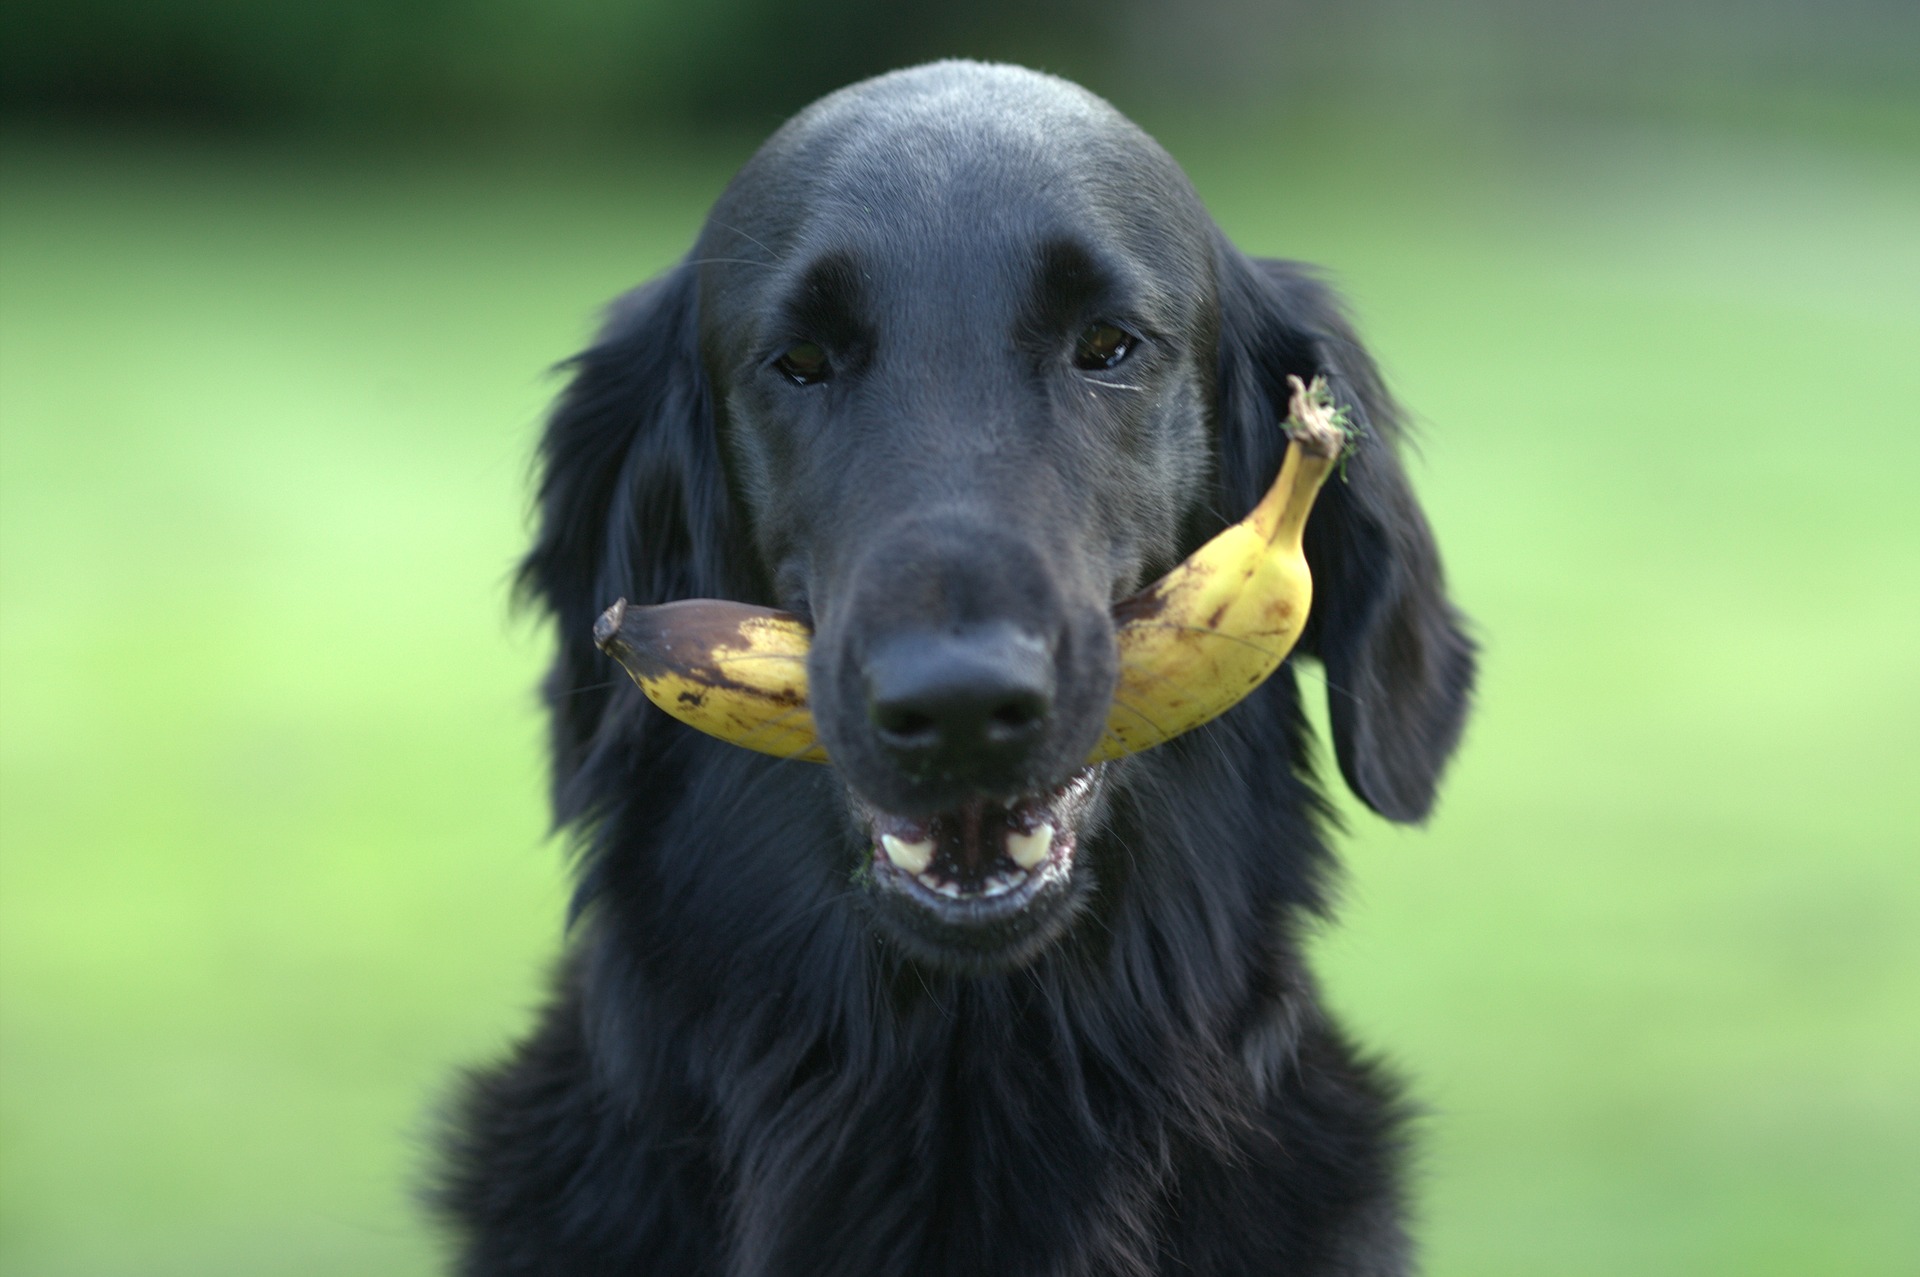 Can Dogs Eat Bananas